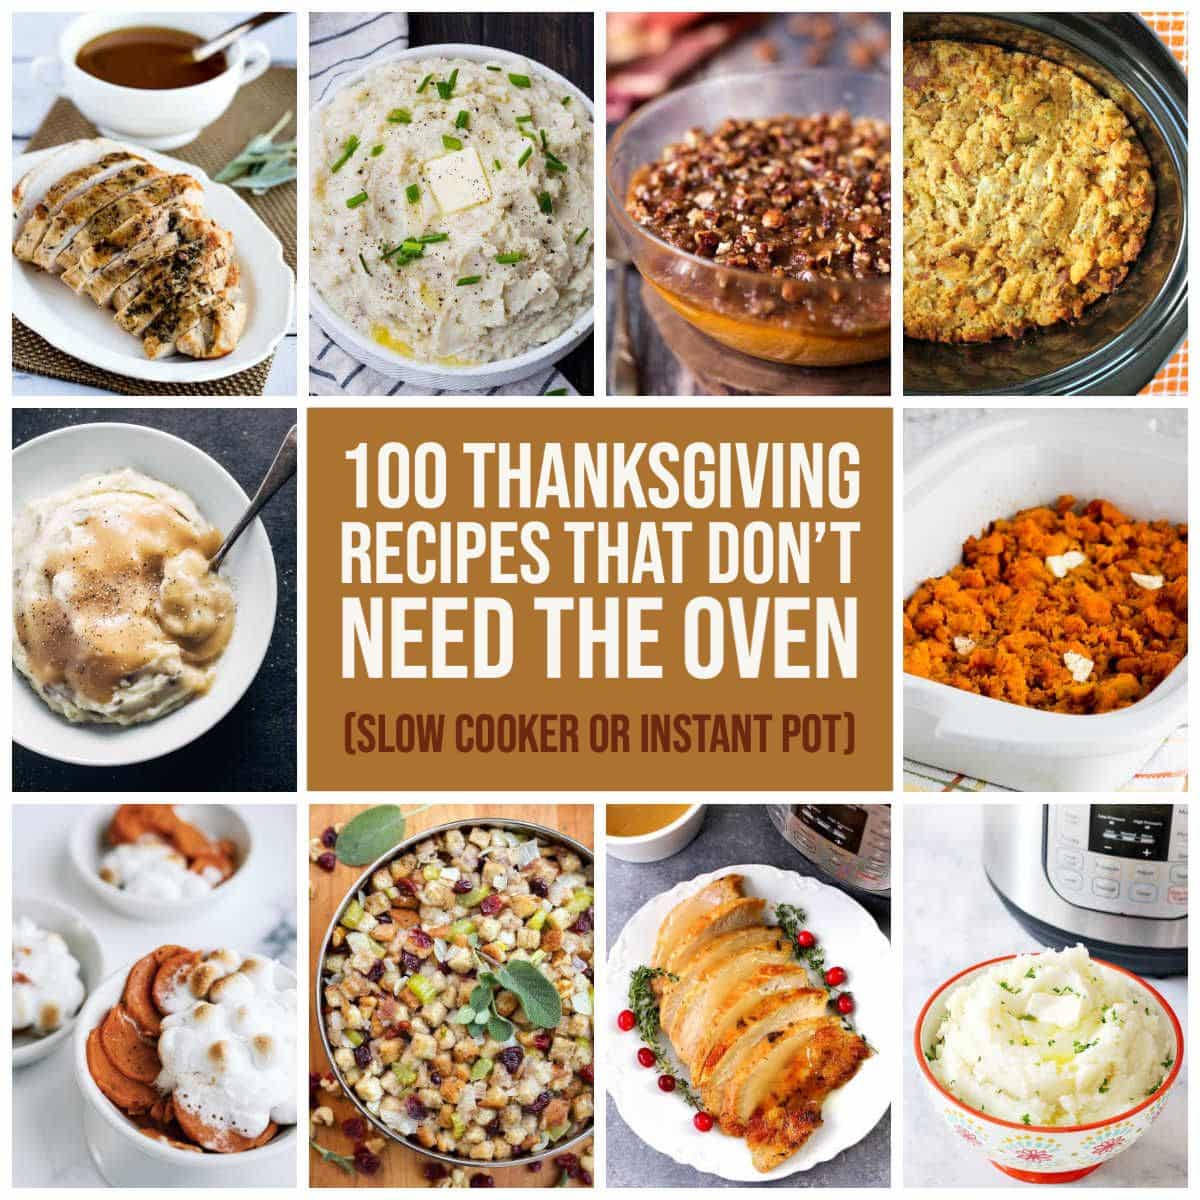 100 Thanksgiving Recipes that Don't Need the Oven (Slow Cooker or Instant Pot) collage of featured recipes